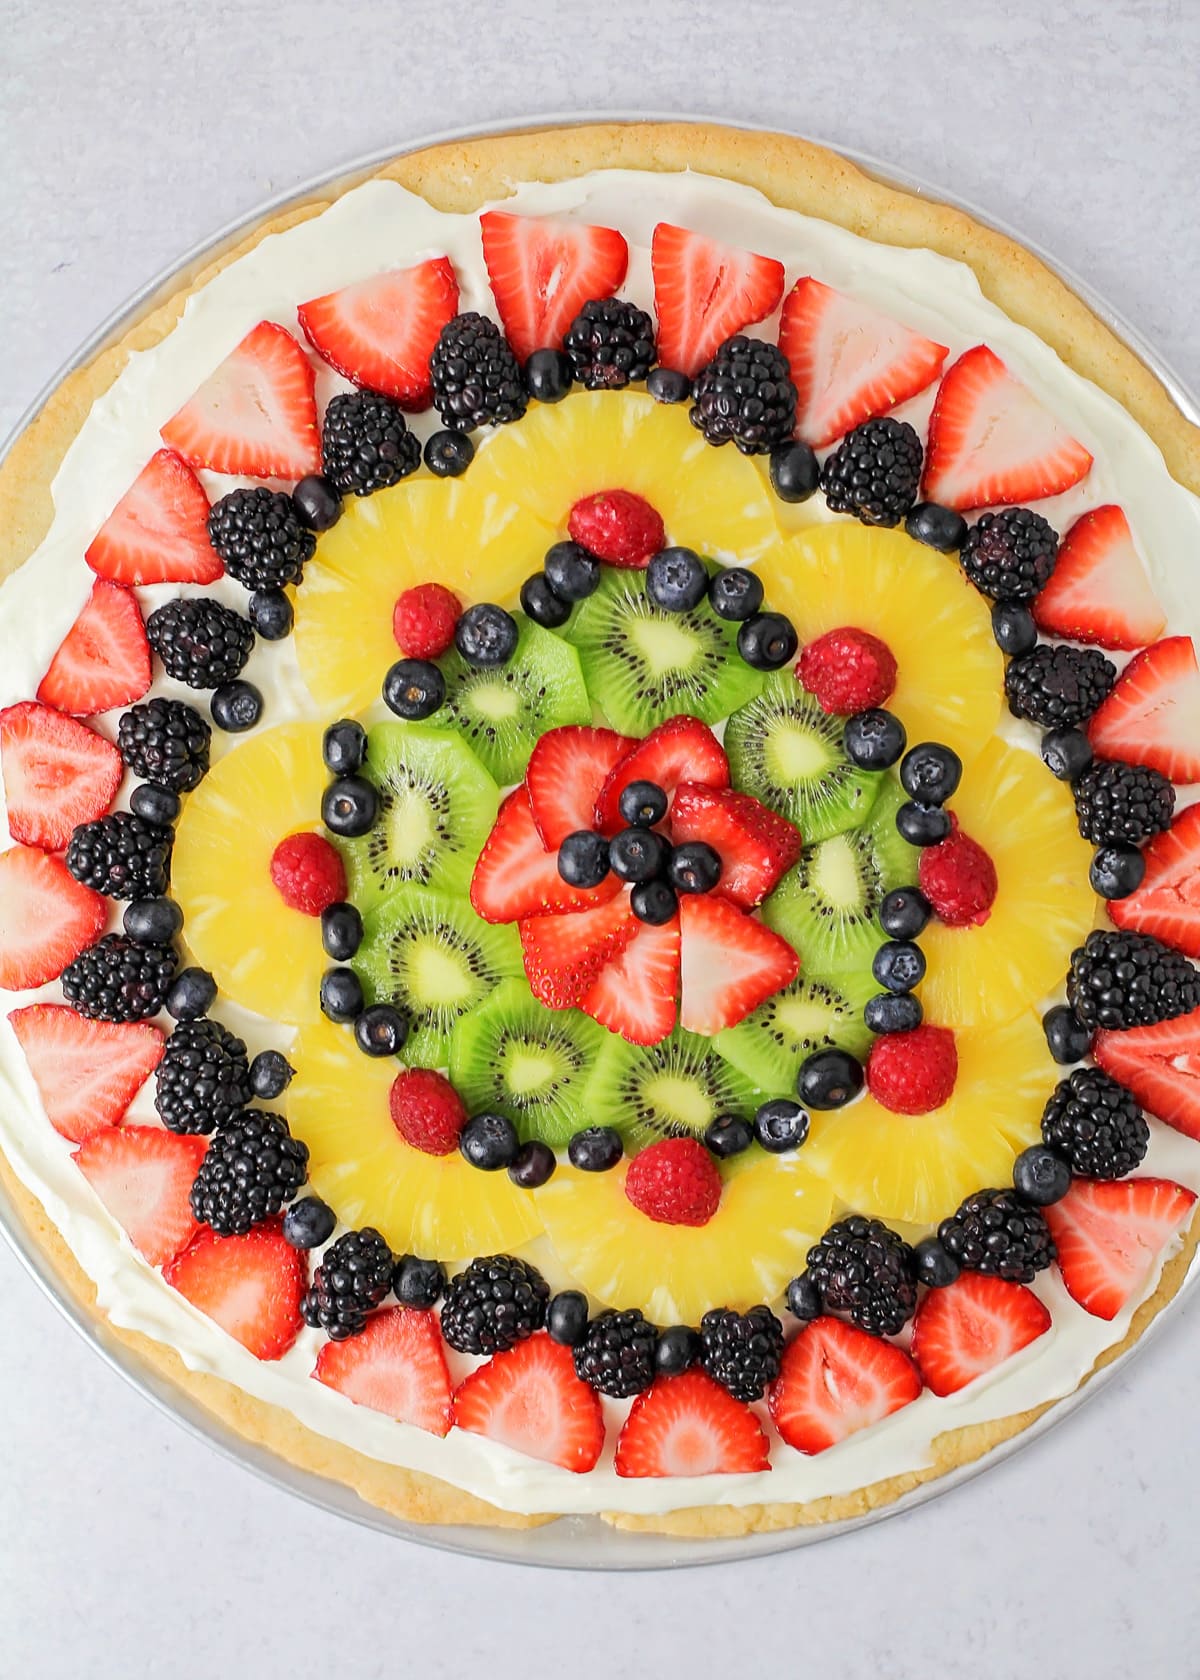 Close up of decorated fruit pizza recipe topped with fruit and berries.